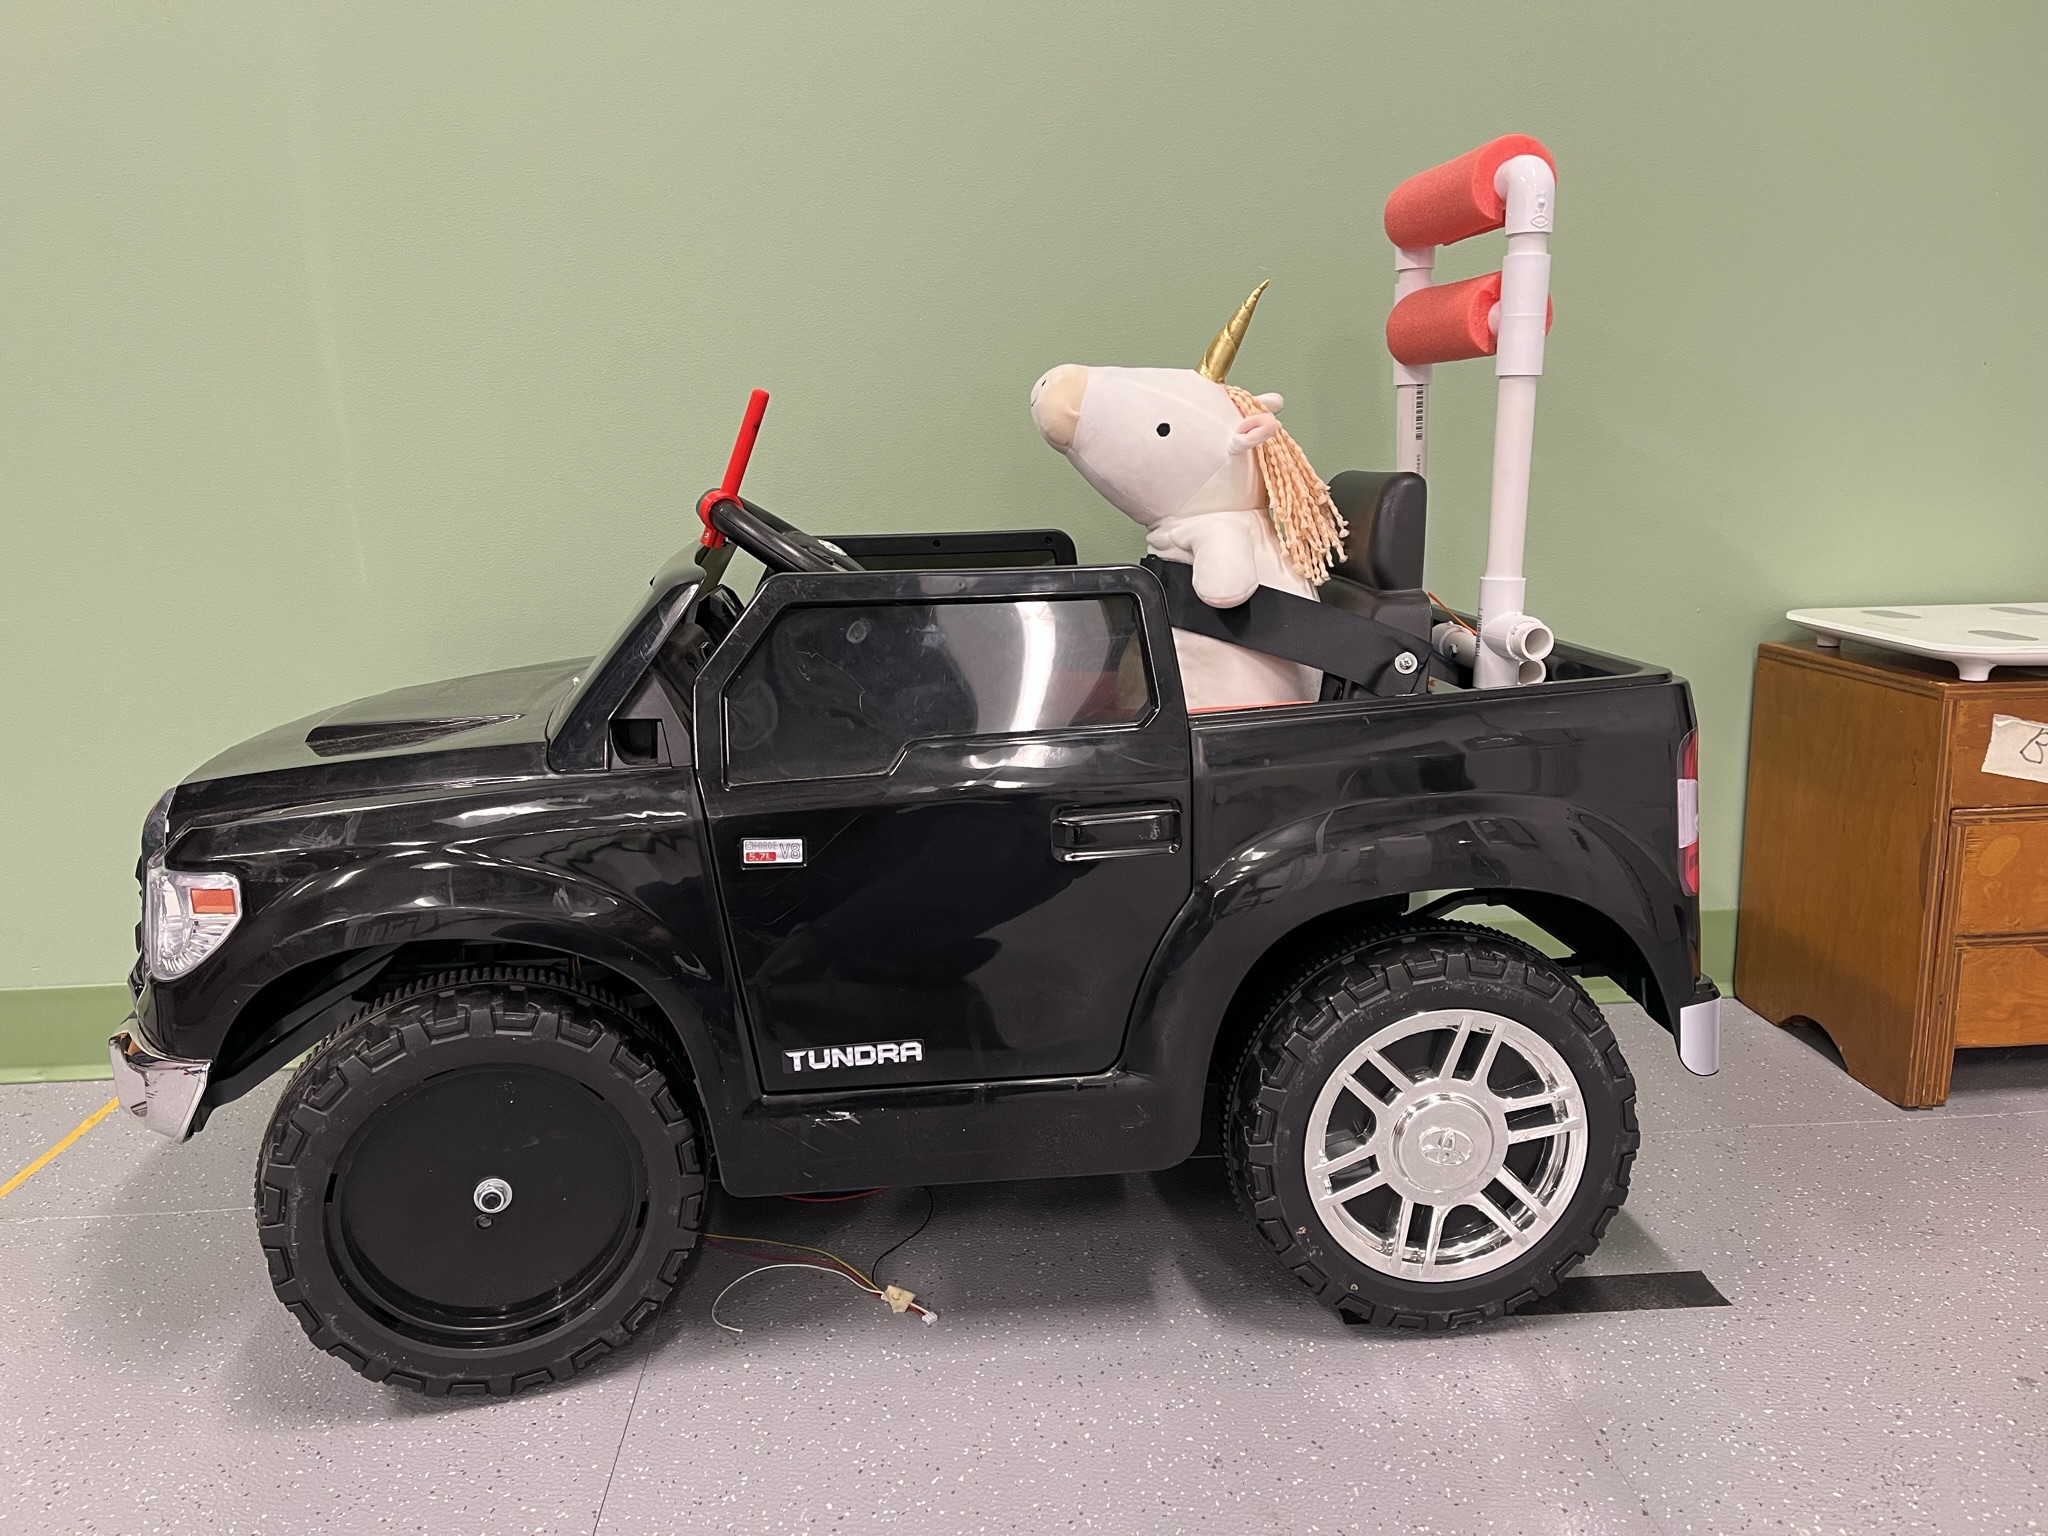 The Research Unicorn sitting in a black Toyota Tundra adapted ride-on car.